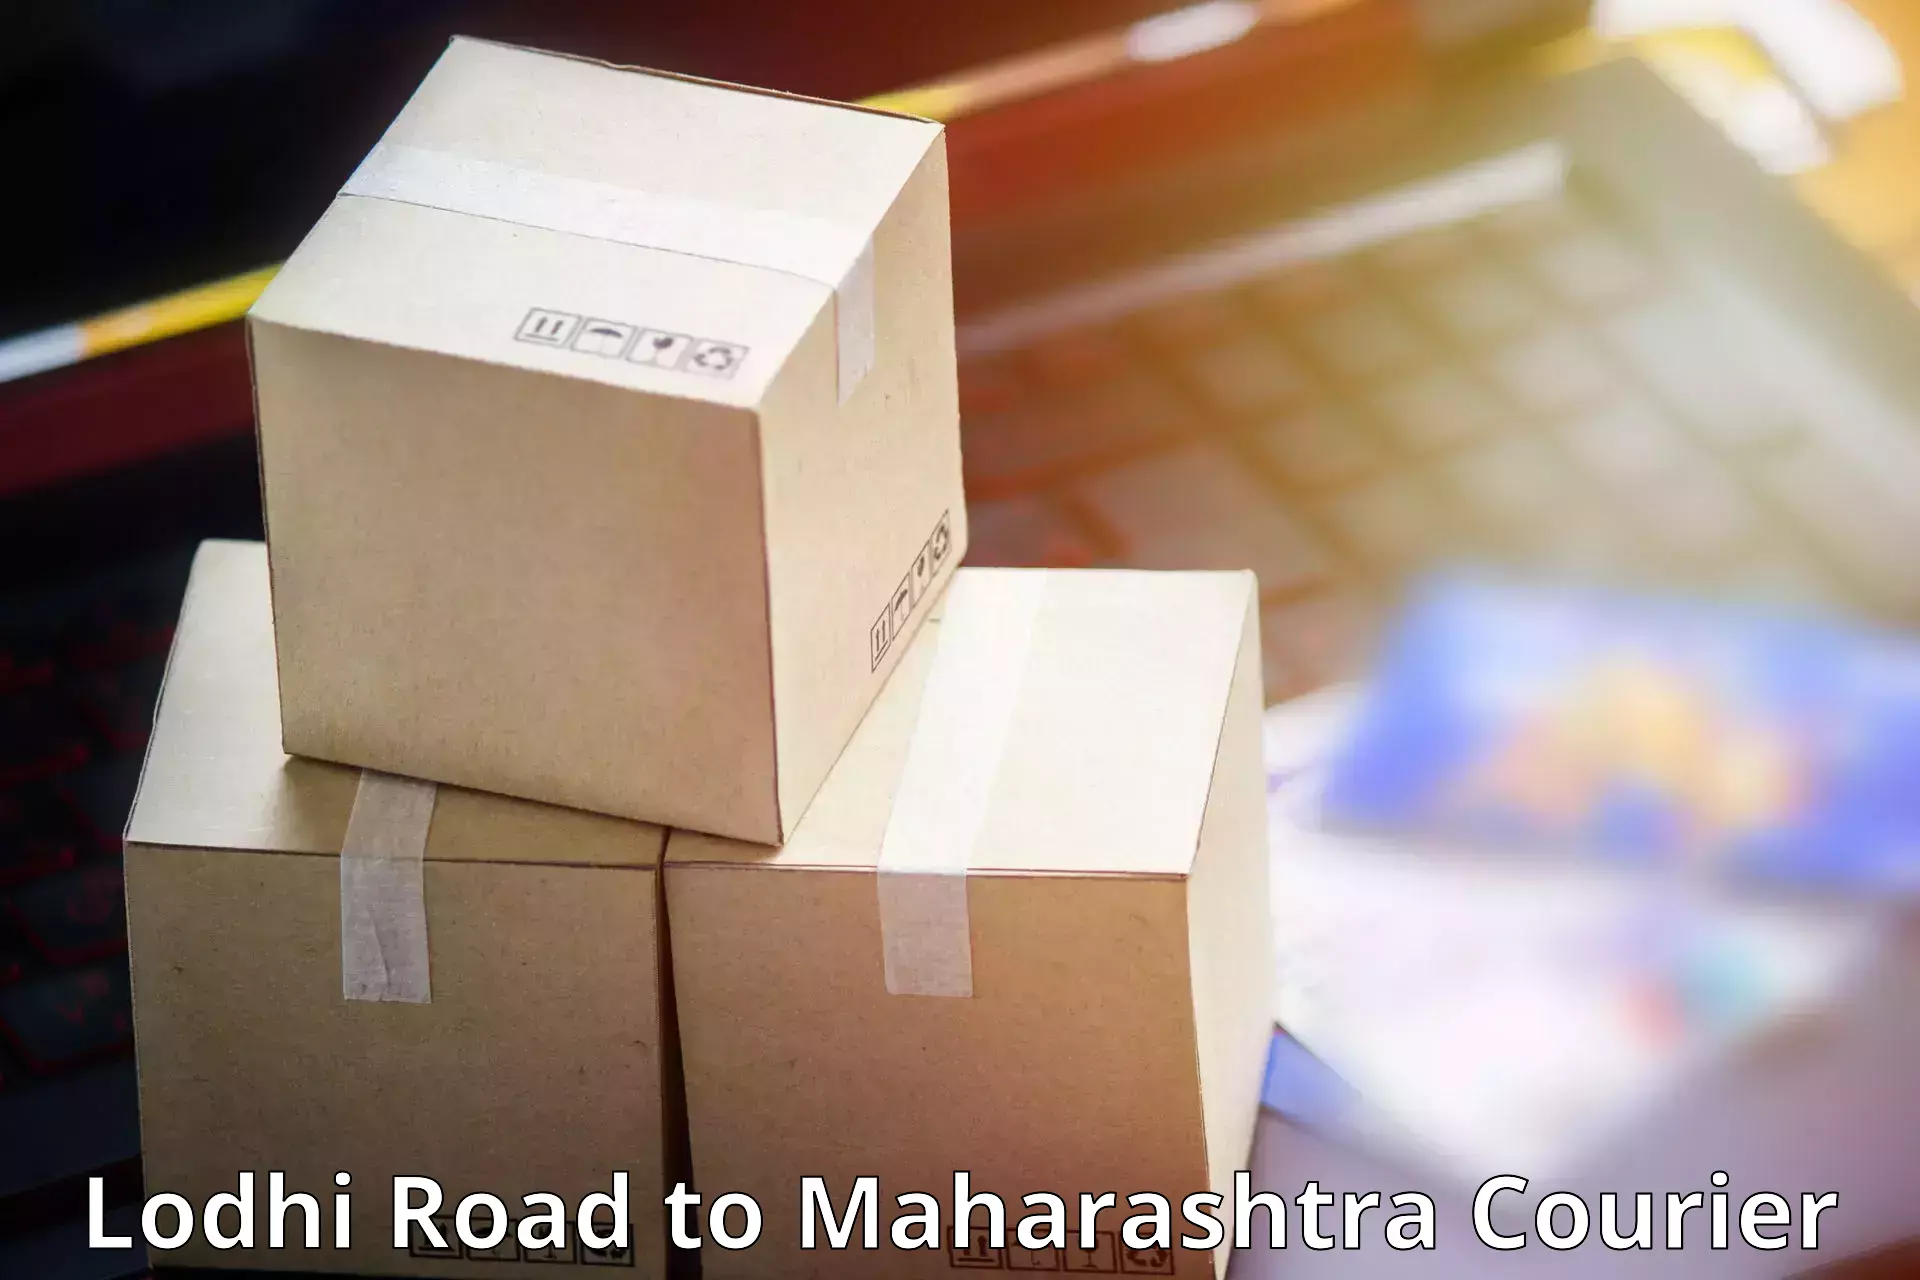 Multi-service courier options Lodhi Road to Shevgaon